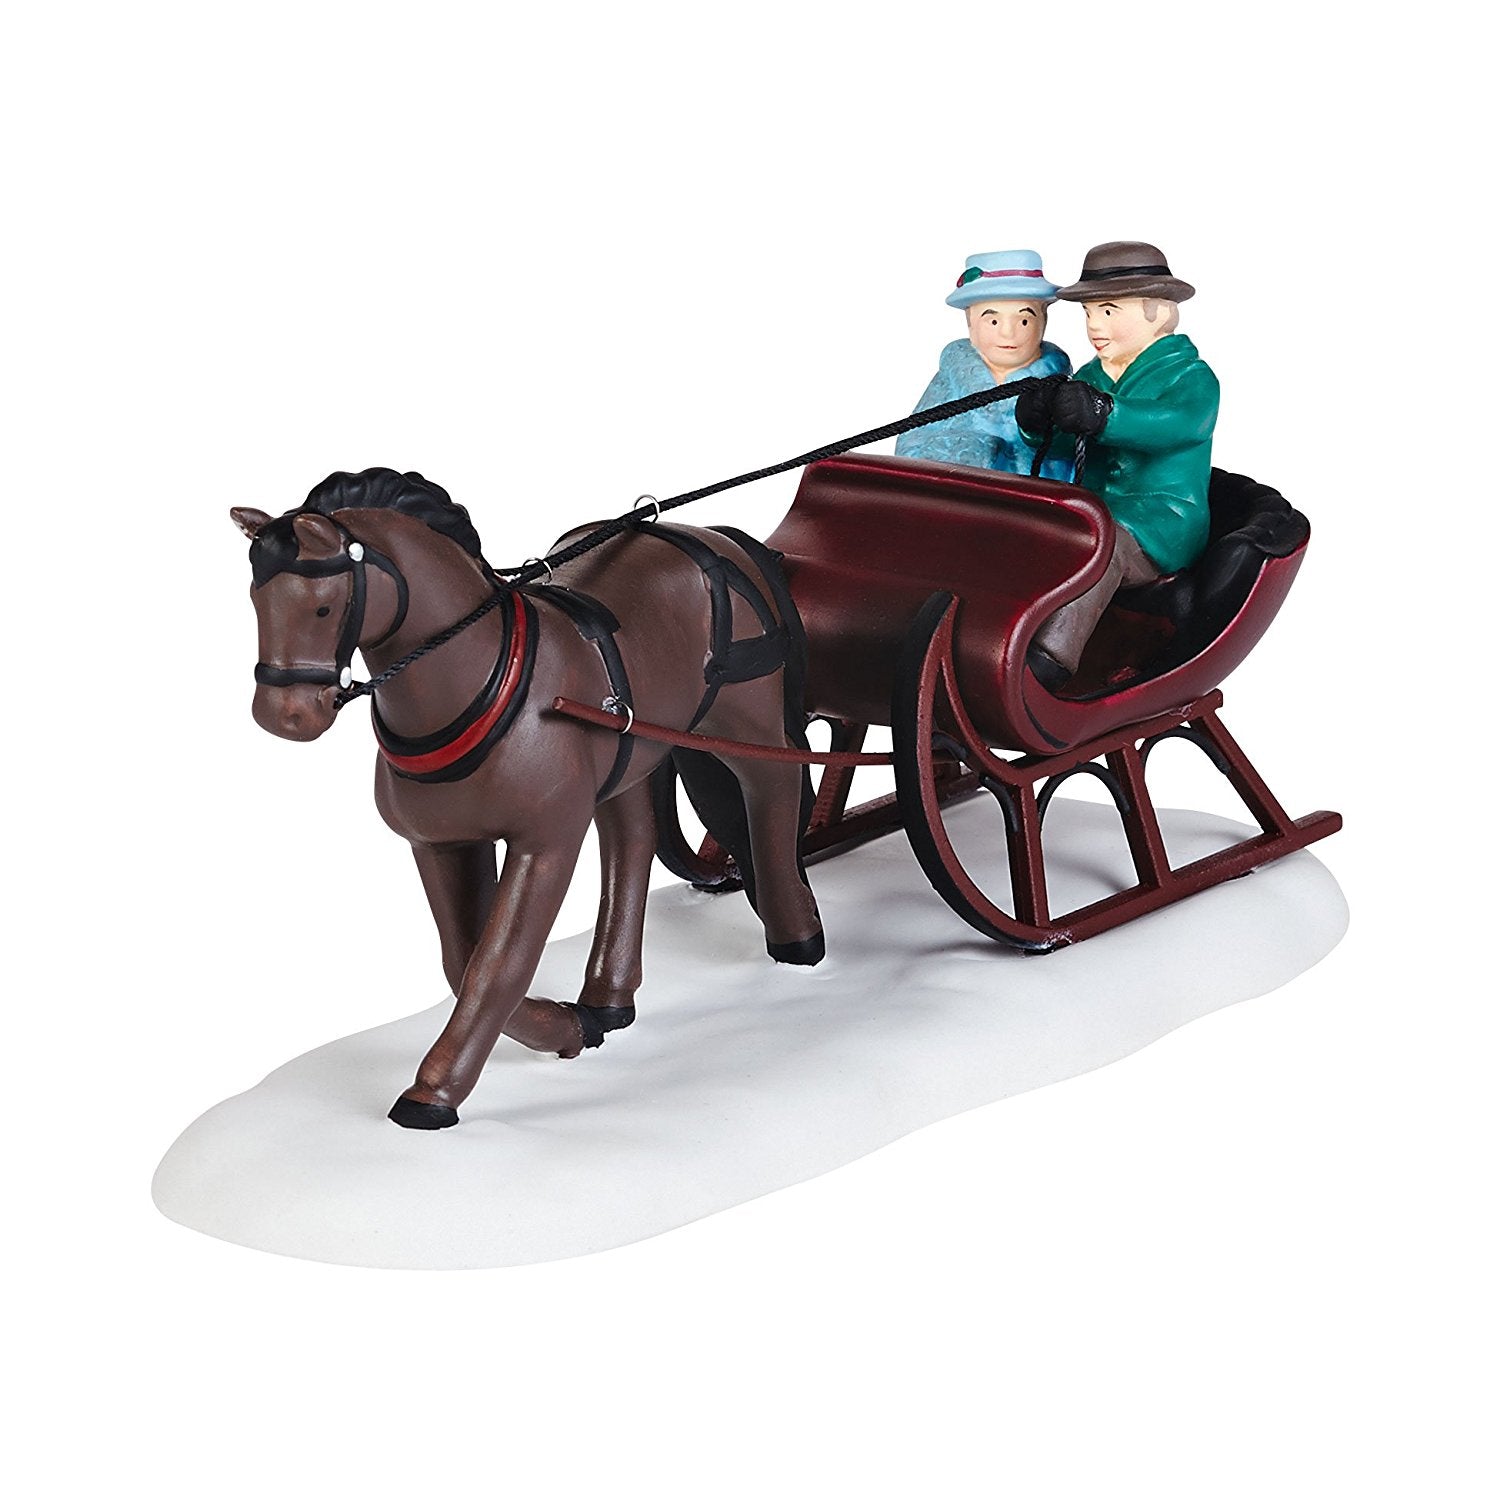 Department 56 New England Village Sleigh Ride Accessory, 2.28 inch